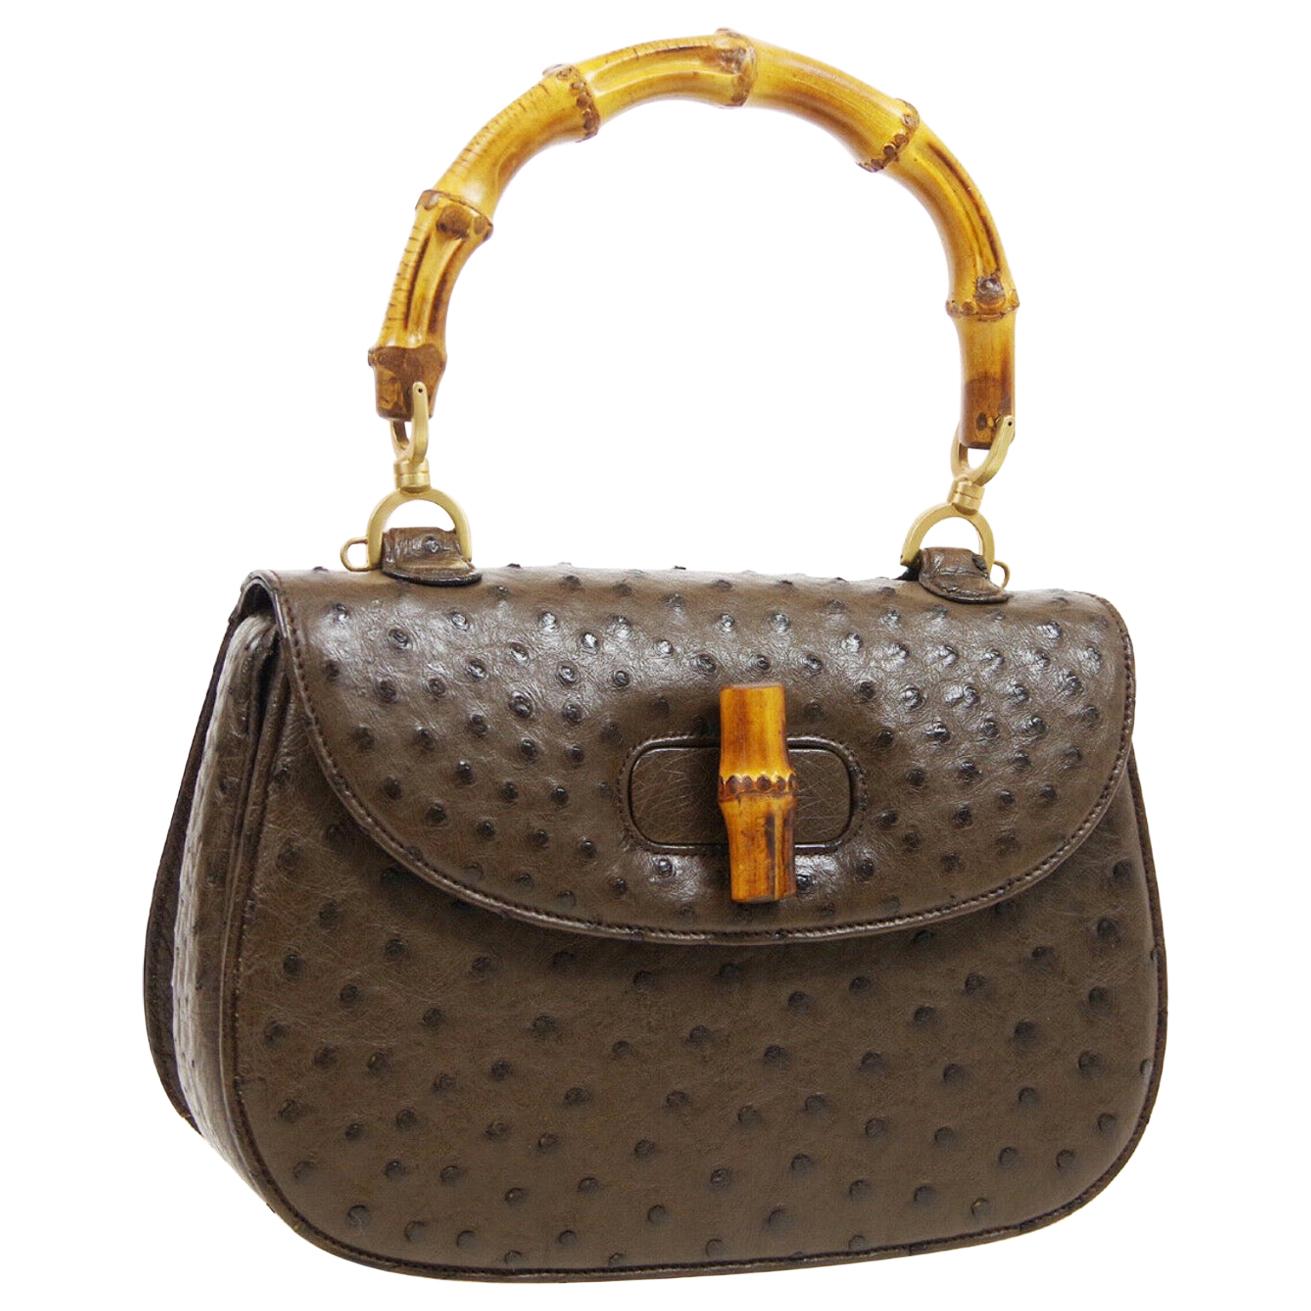 Gucci Brown Ostrich Bamboo Exotic Kelly Style Top Handle Satchel Shoulder Bag 